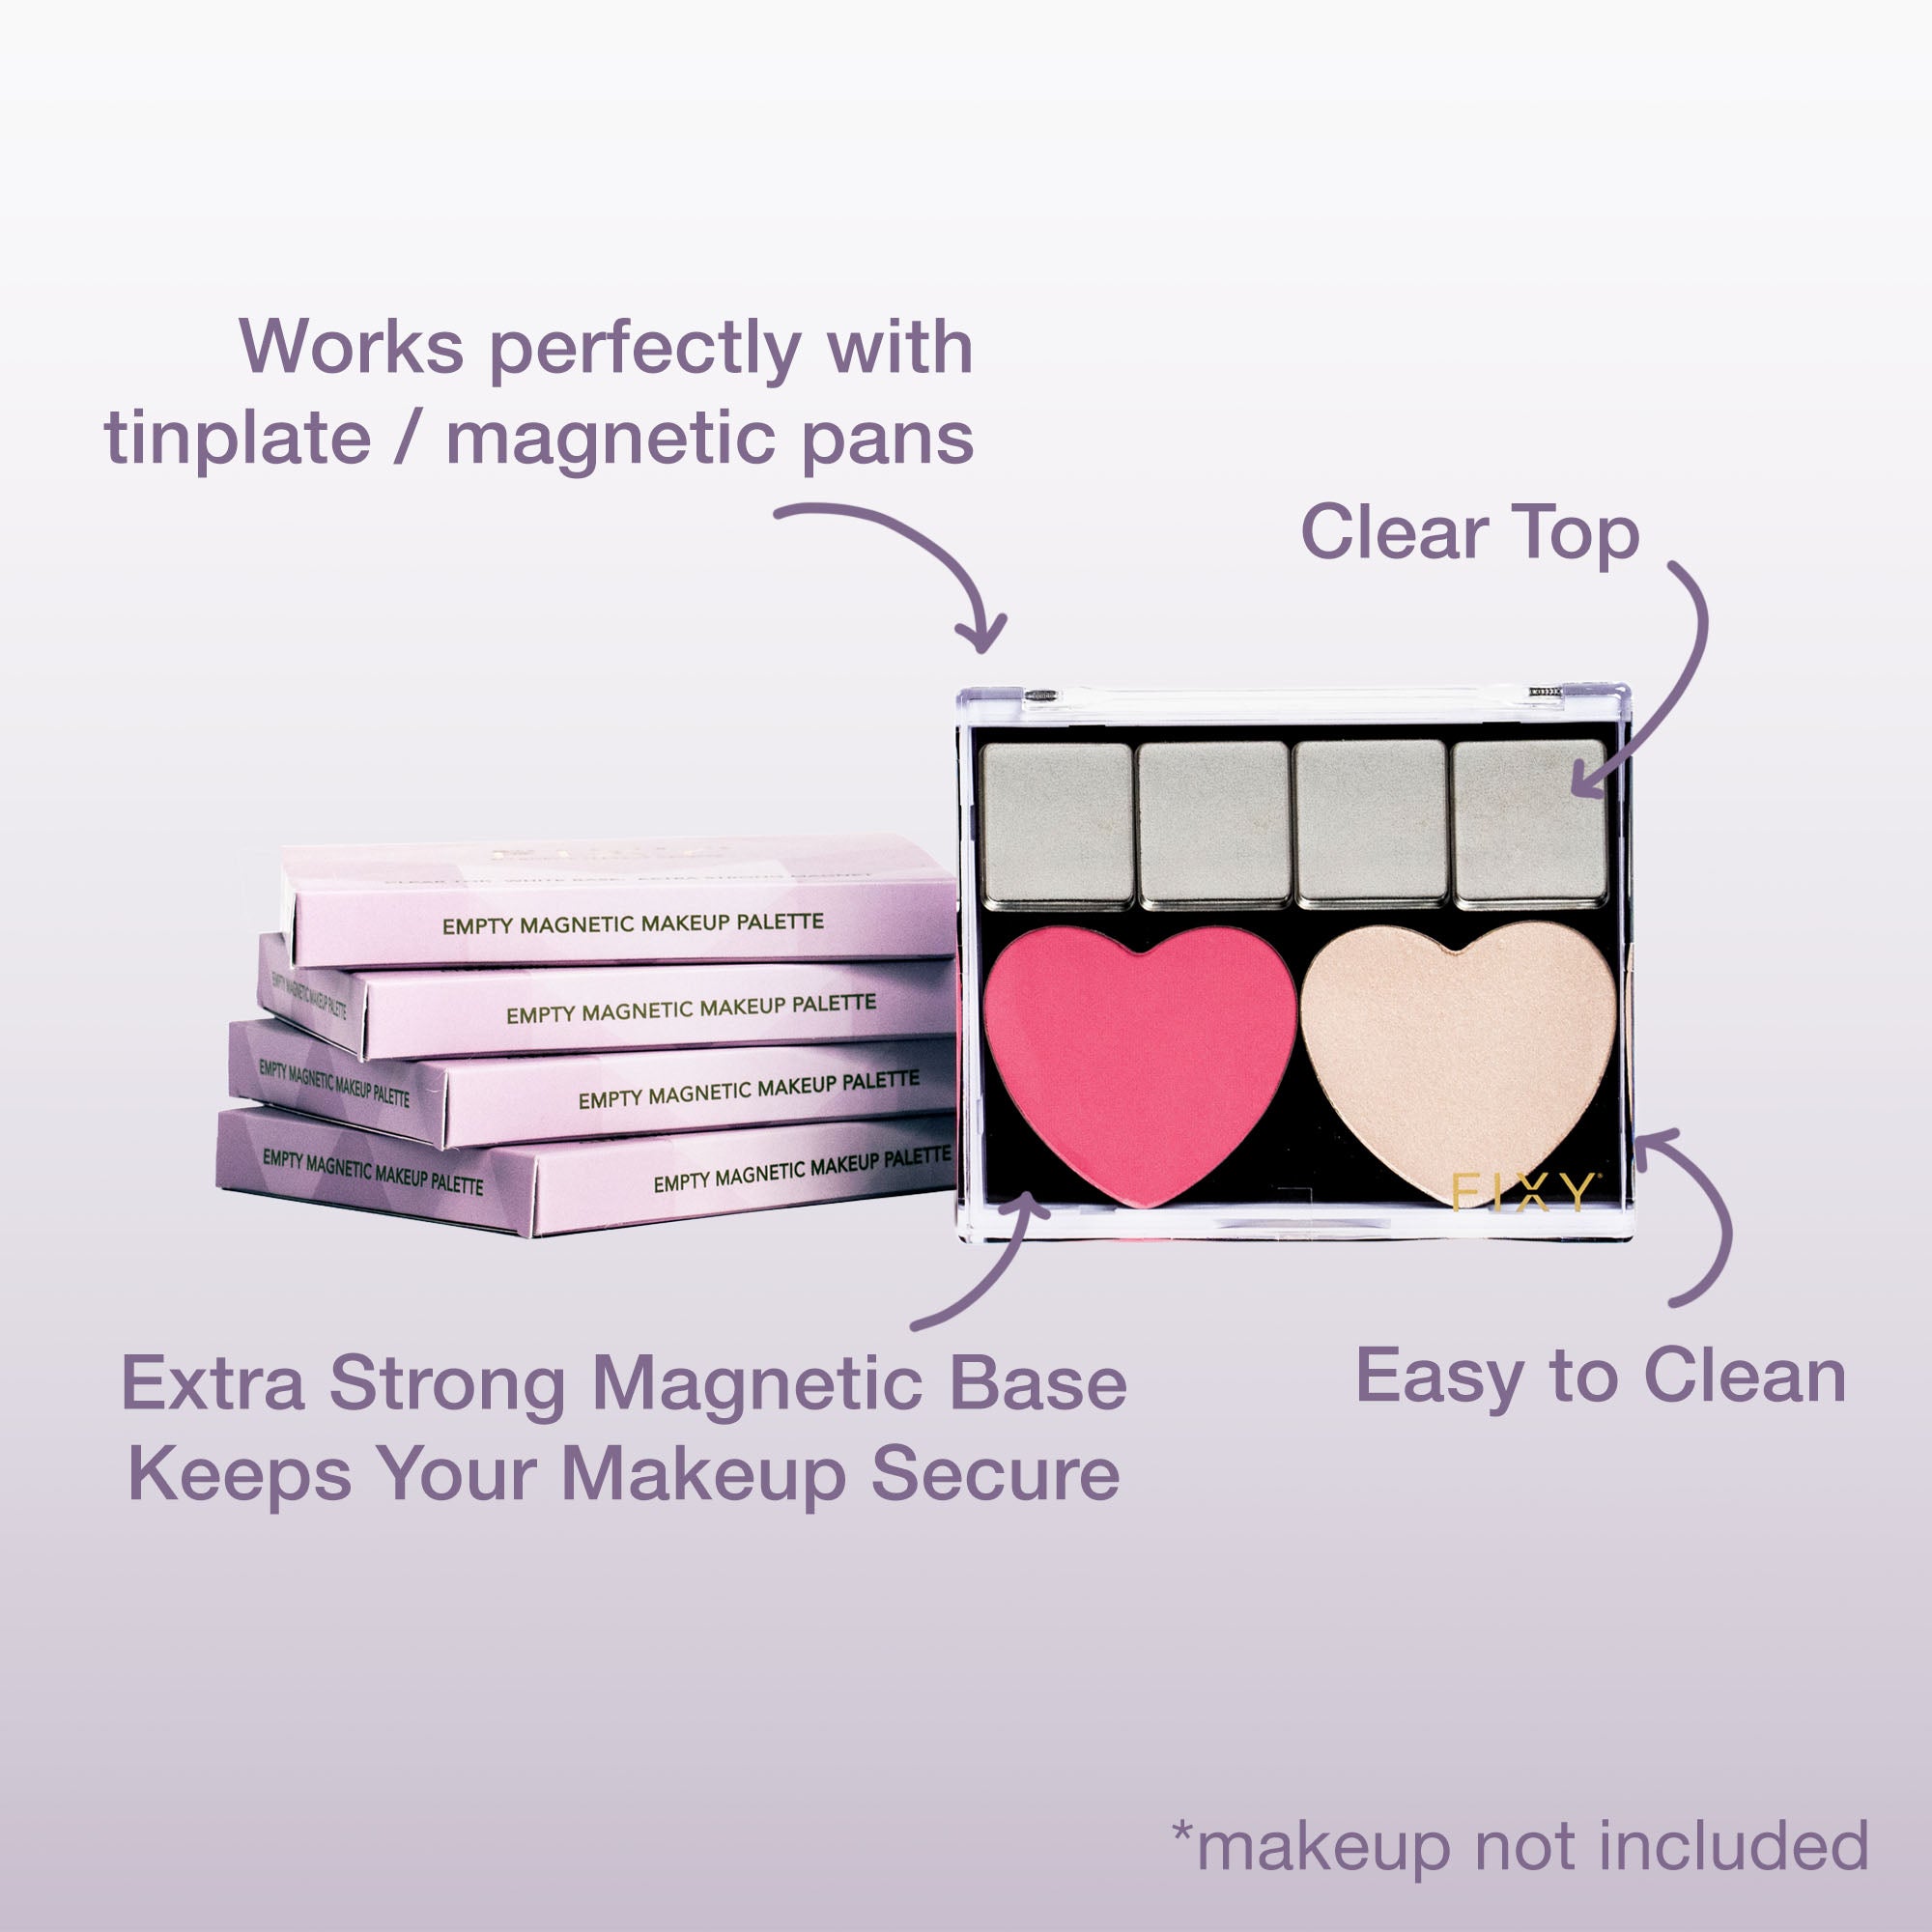 FIXY small empty magnetic palette clear light weightFIXY empty magnetic makeup palette with a clear top, filled with various shades of tinplate/magnetic pans, including a pink heart-shaped pan. Stacked palettes and descriptive callouts emphasize the palette&#39;s extra-strong magnetic base and easy-to-clean surface. Size Small